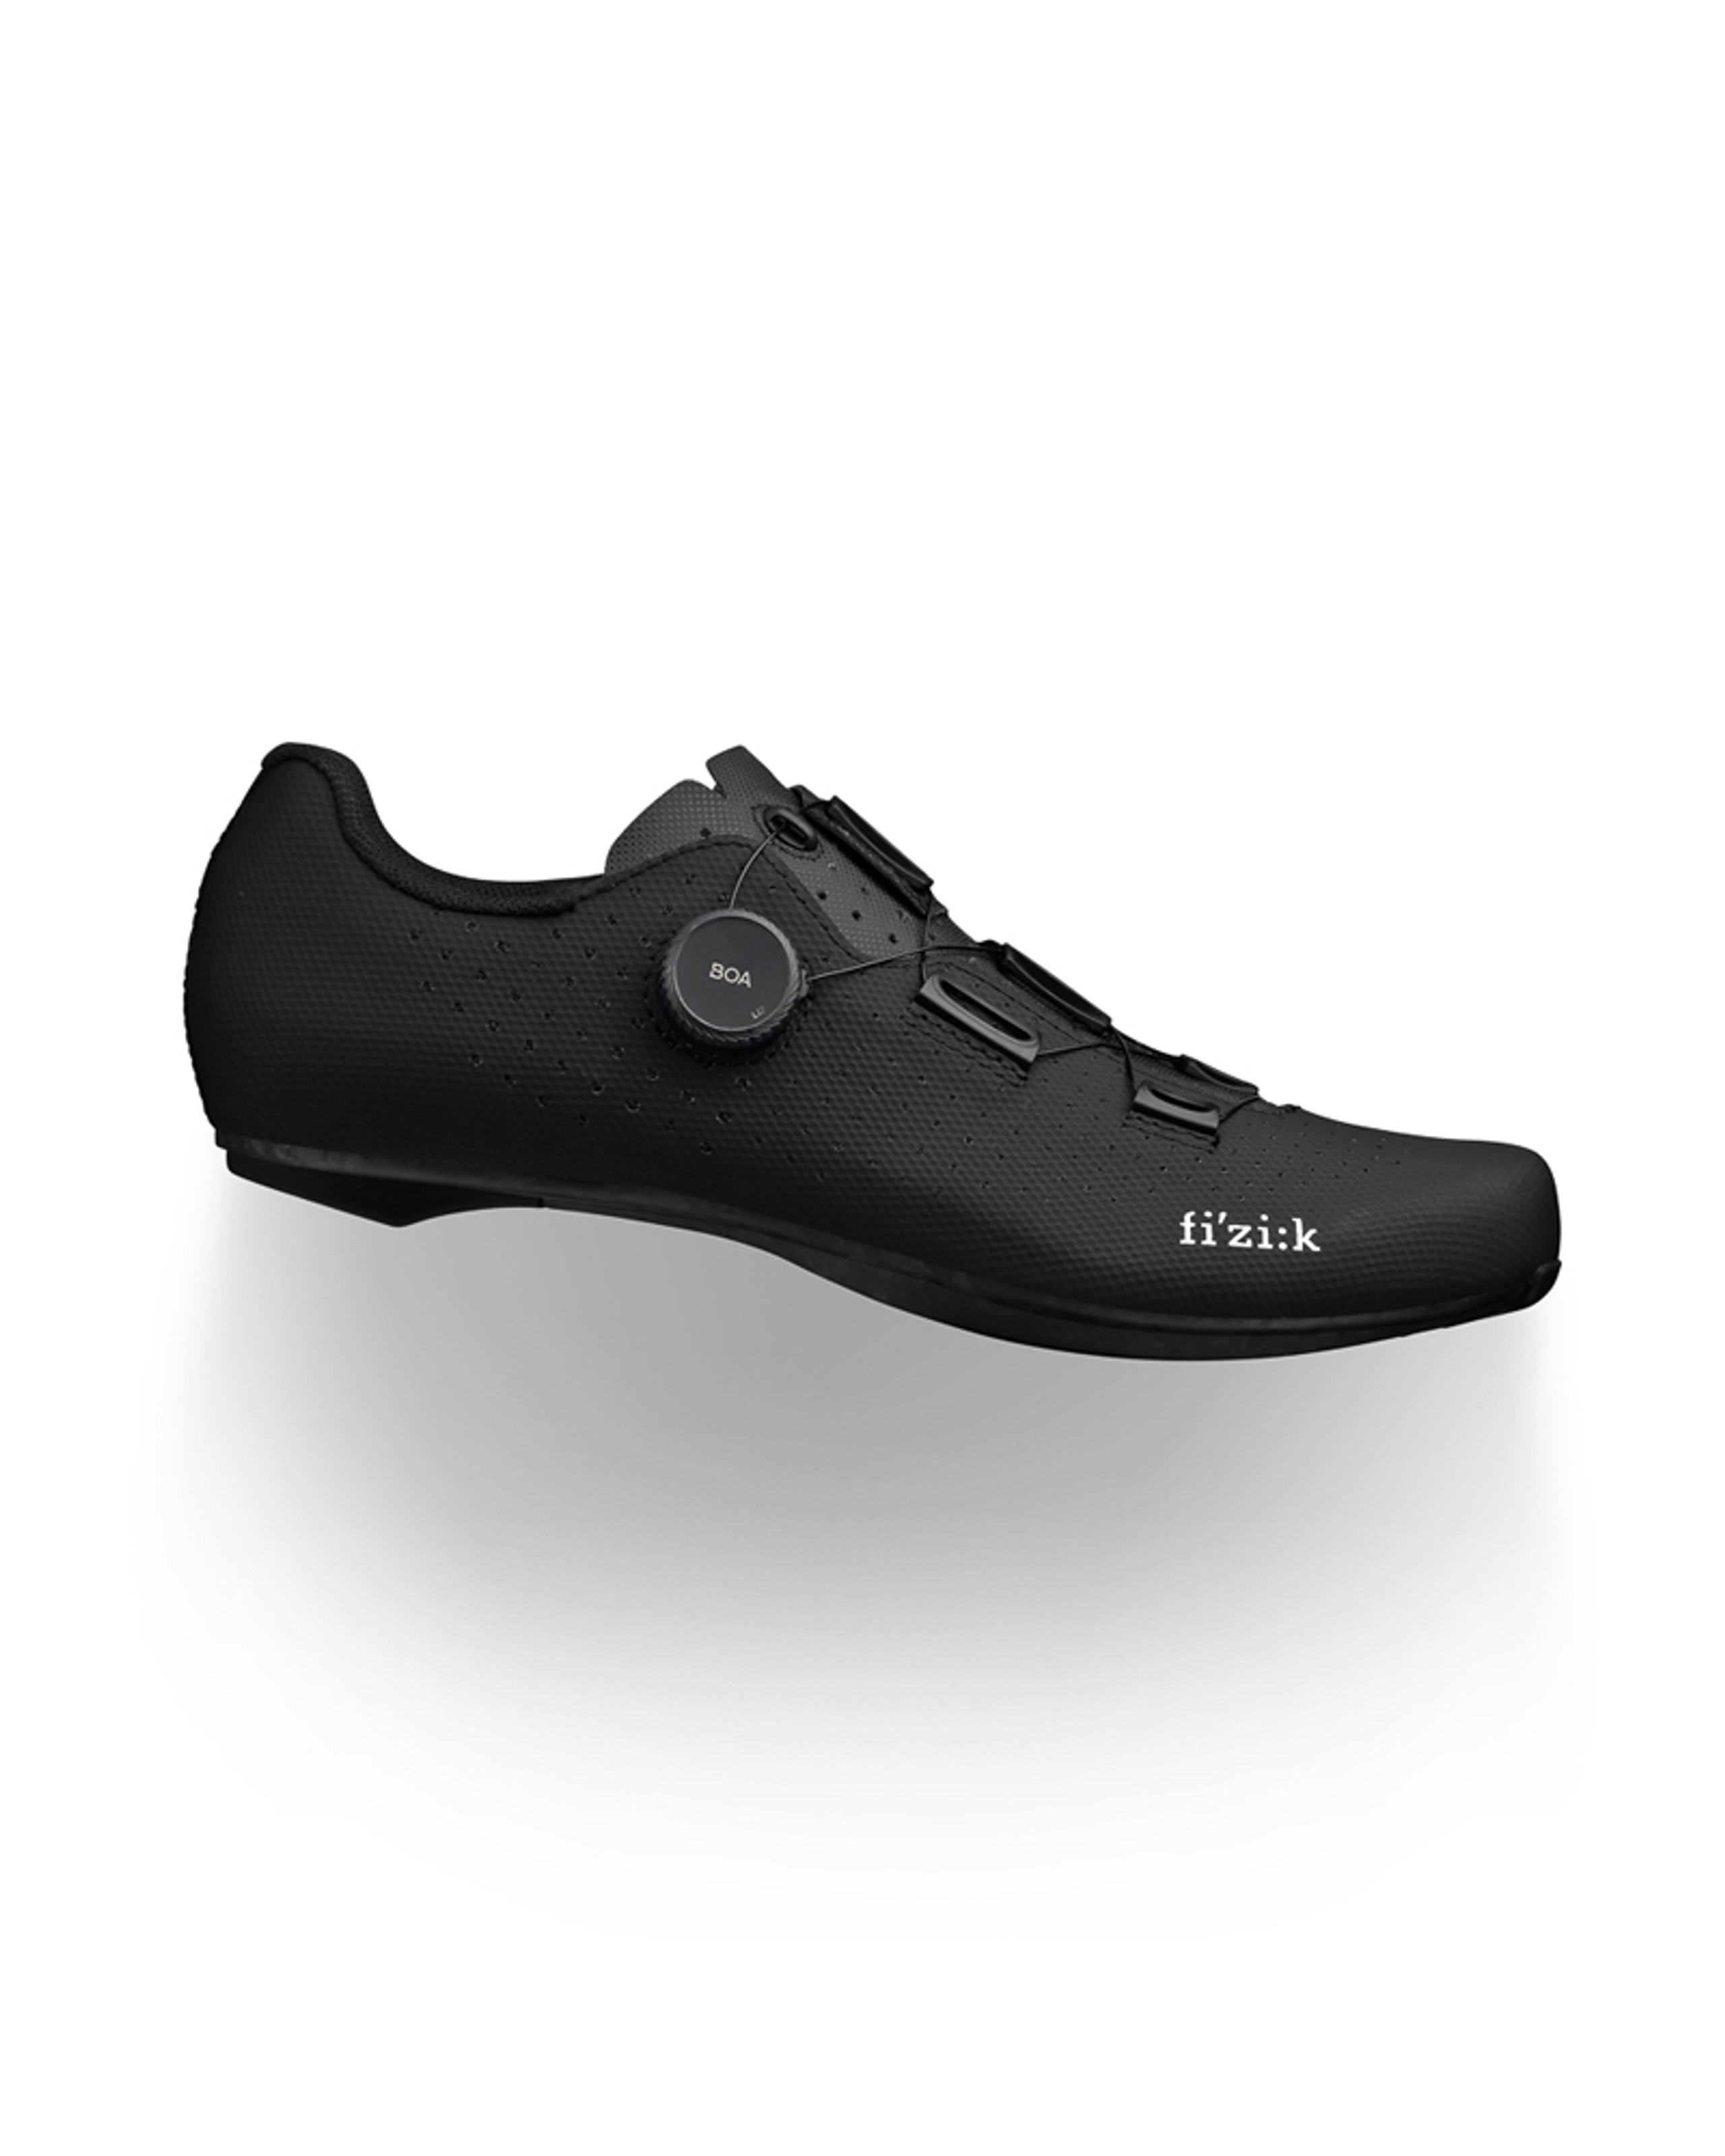 Fizik Tempo Decos Carbon Wide Road Cycling Shoes | New Era Cycle